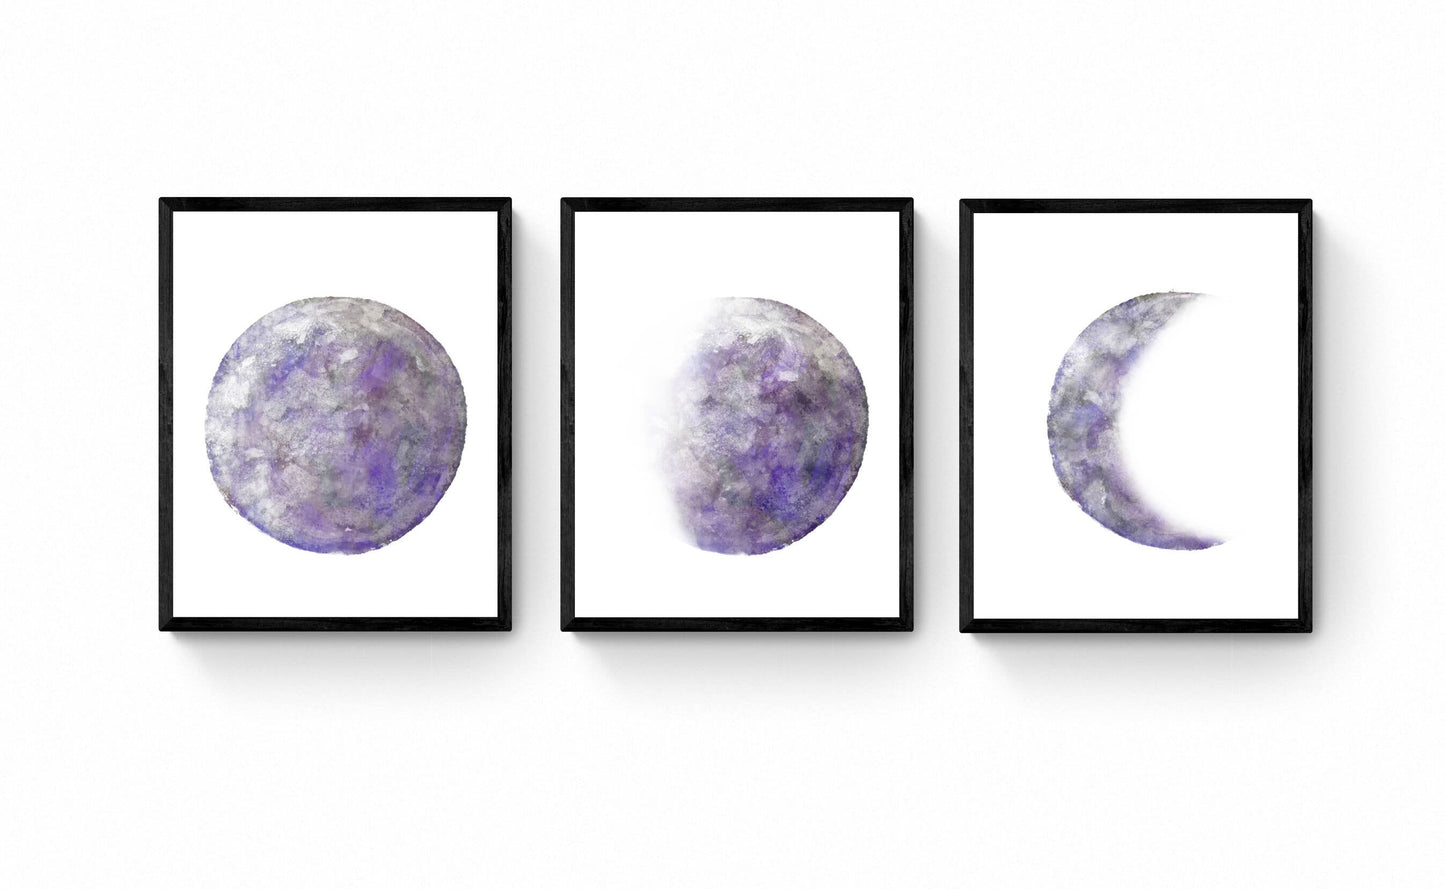 Moon Phases Set of 3 Prints, Purple Moon Poster, Galaxy Artwork, Home Wall Decor, Modern Art, Bedroom Wall Decor, Lunar phase, Space Art